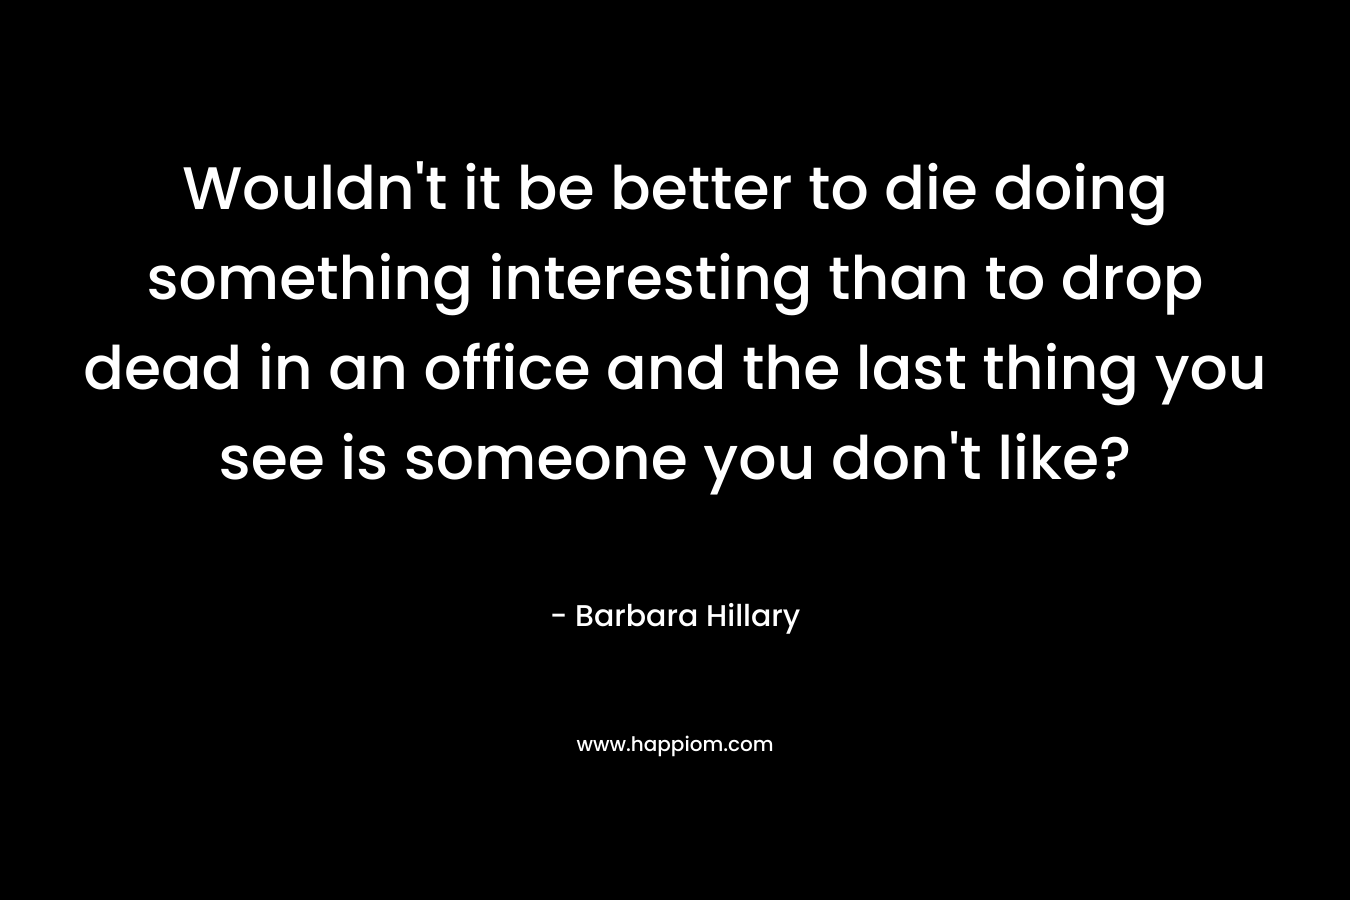 Wouldn’t it be better to die doing something interesting than to drop dead in an office and the last thing you see is someone you don’t like? – Barbara Hillary